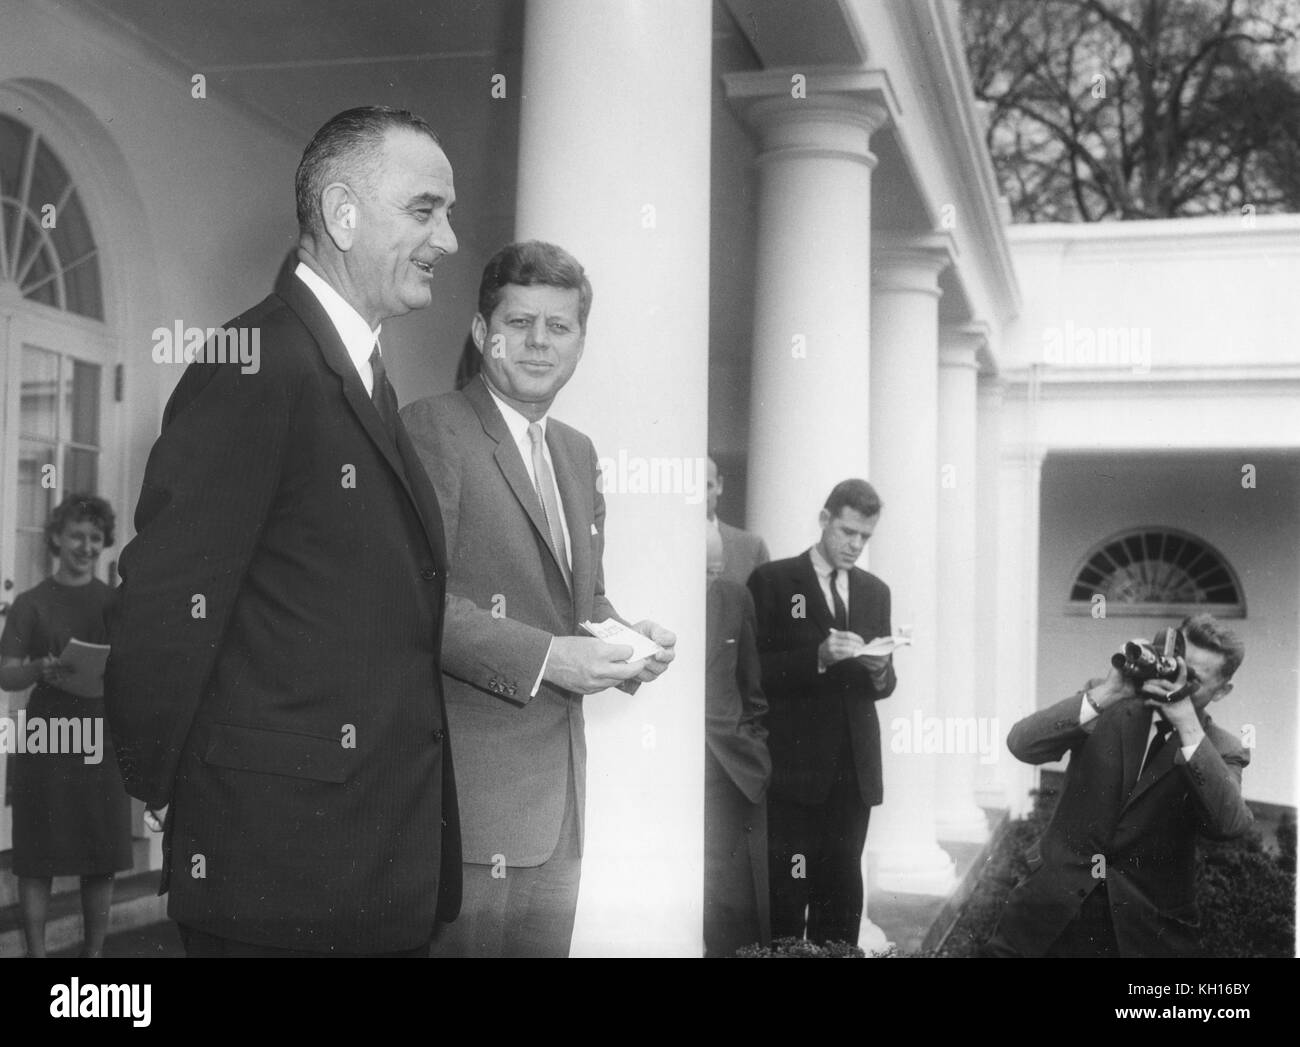 President John F Kennedy and Vice-President Lyndon B Johnson meet with the press in the White House Rose Garden after Kennedy signed Executive Order 10925 requiring government contractors to treat all qualified employees equally "without regard to their race, creed, color or national origin," Washington, DC, 03/06/1961. Photo by Abbie Rowe Stock Photo